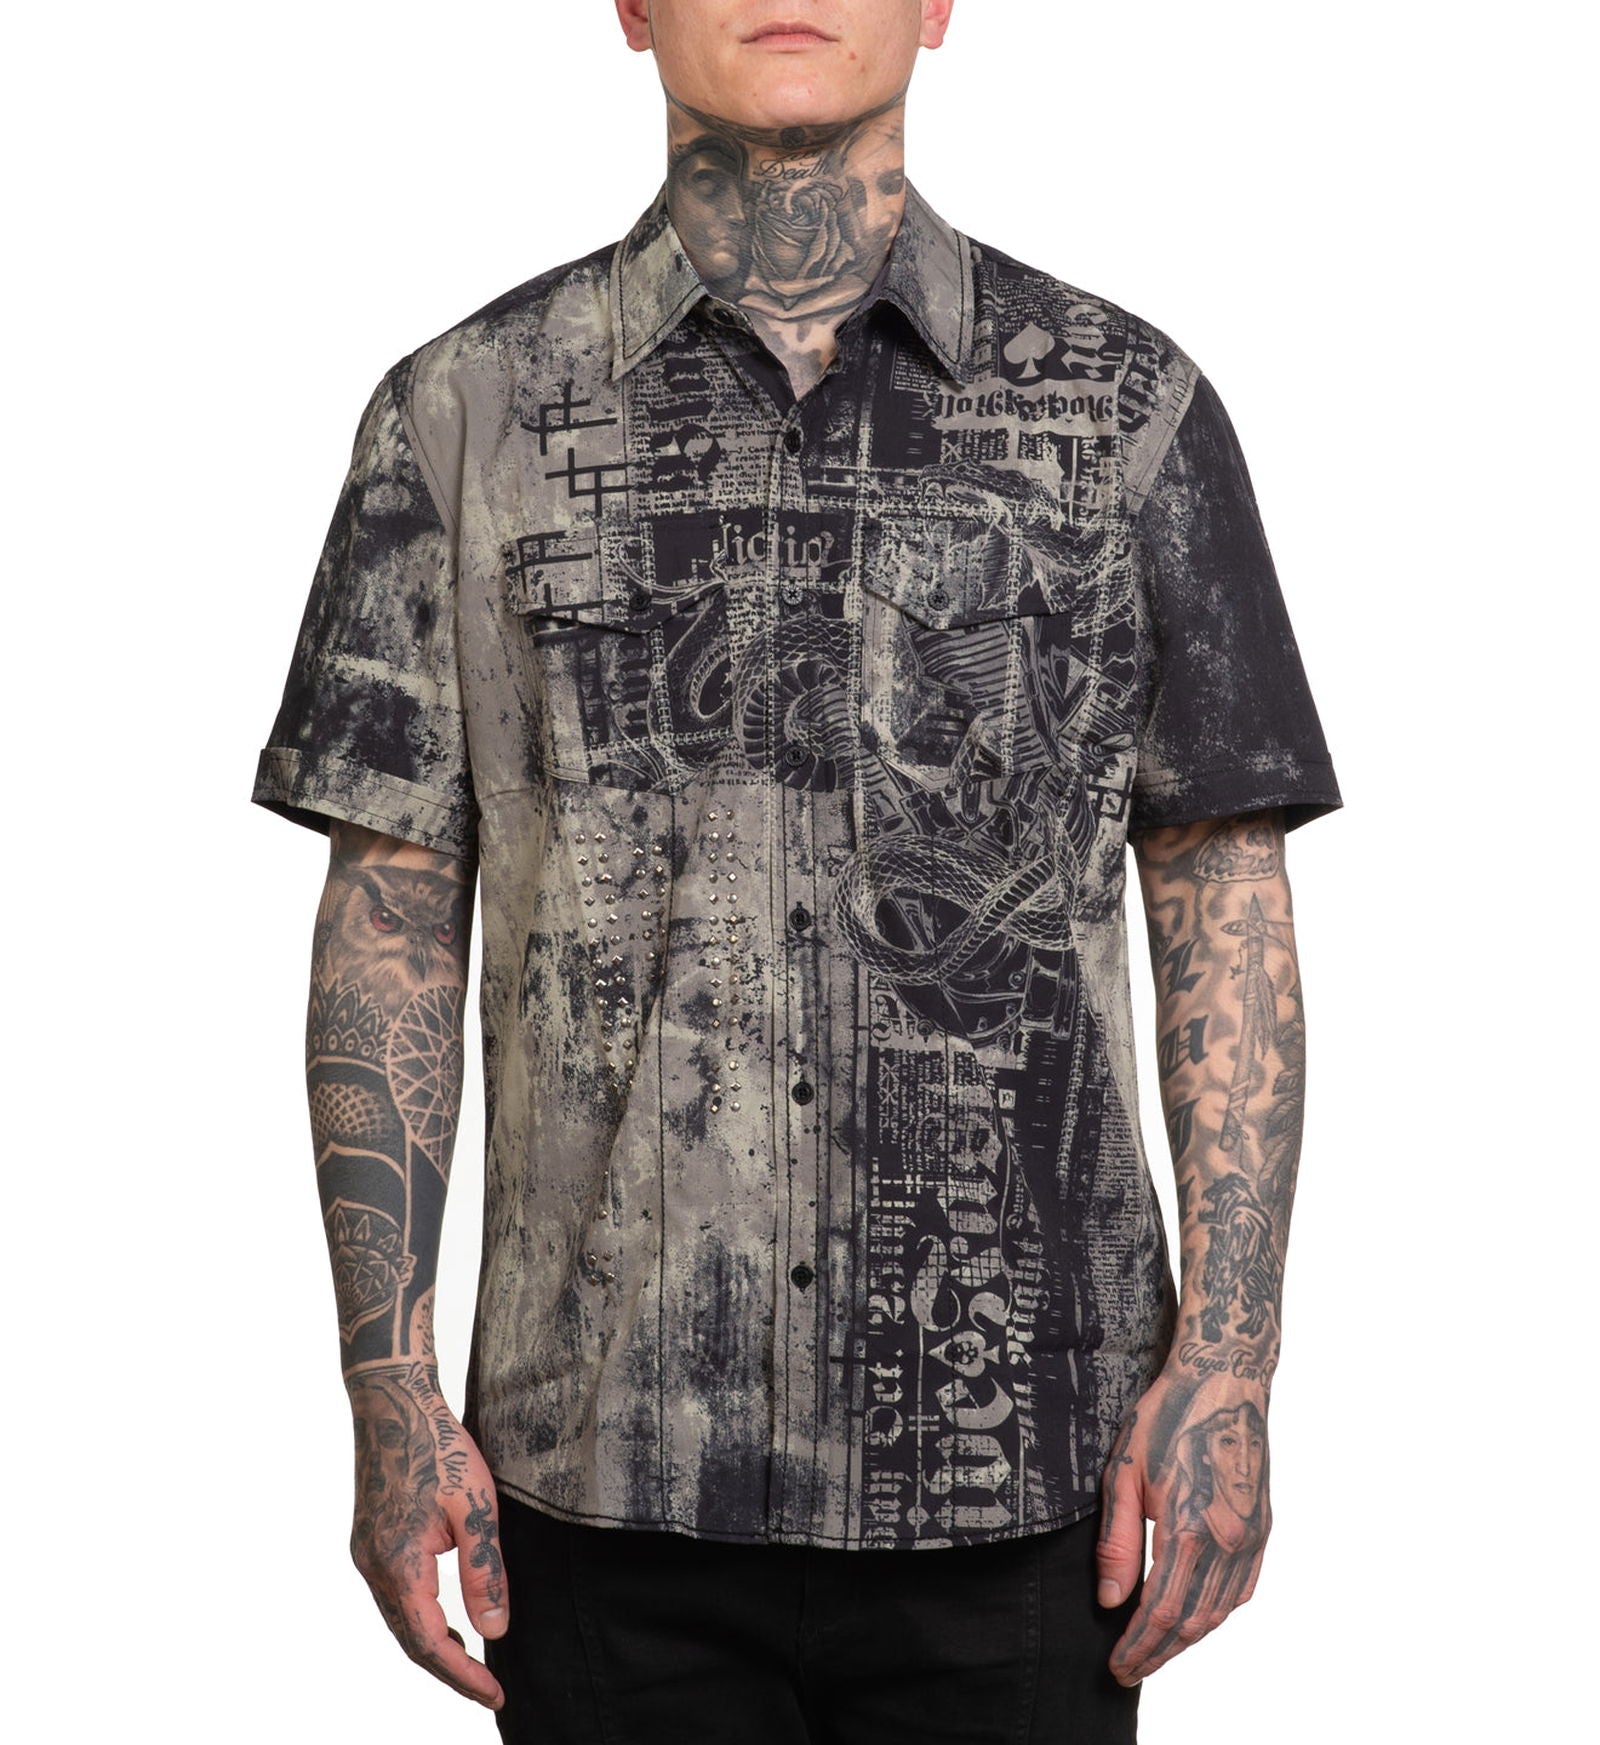 Motorway Chaos - Affliction Clothing